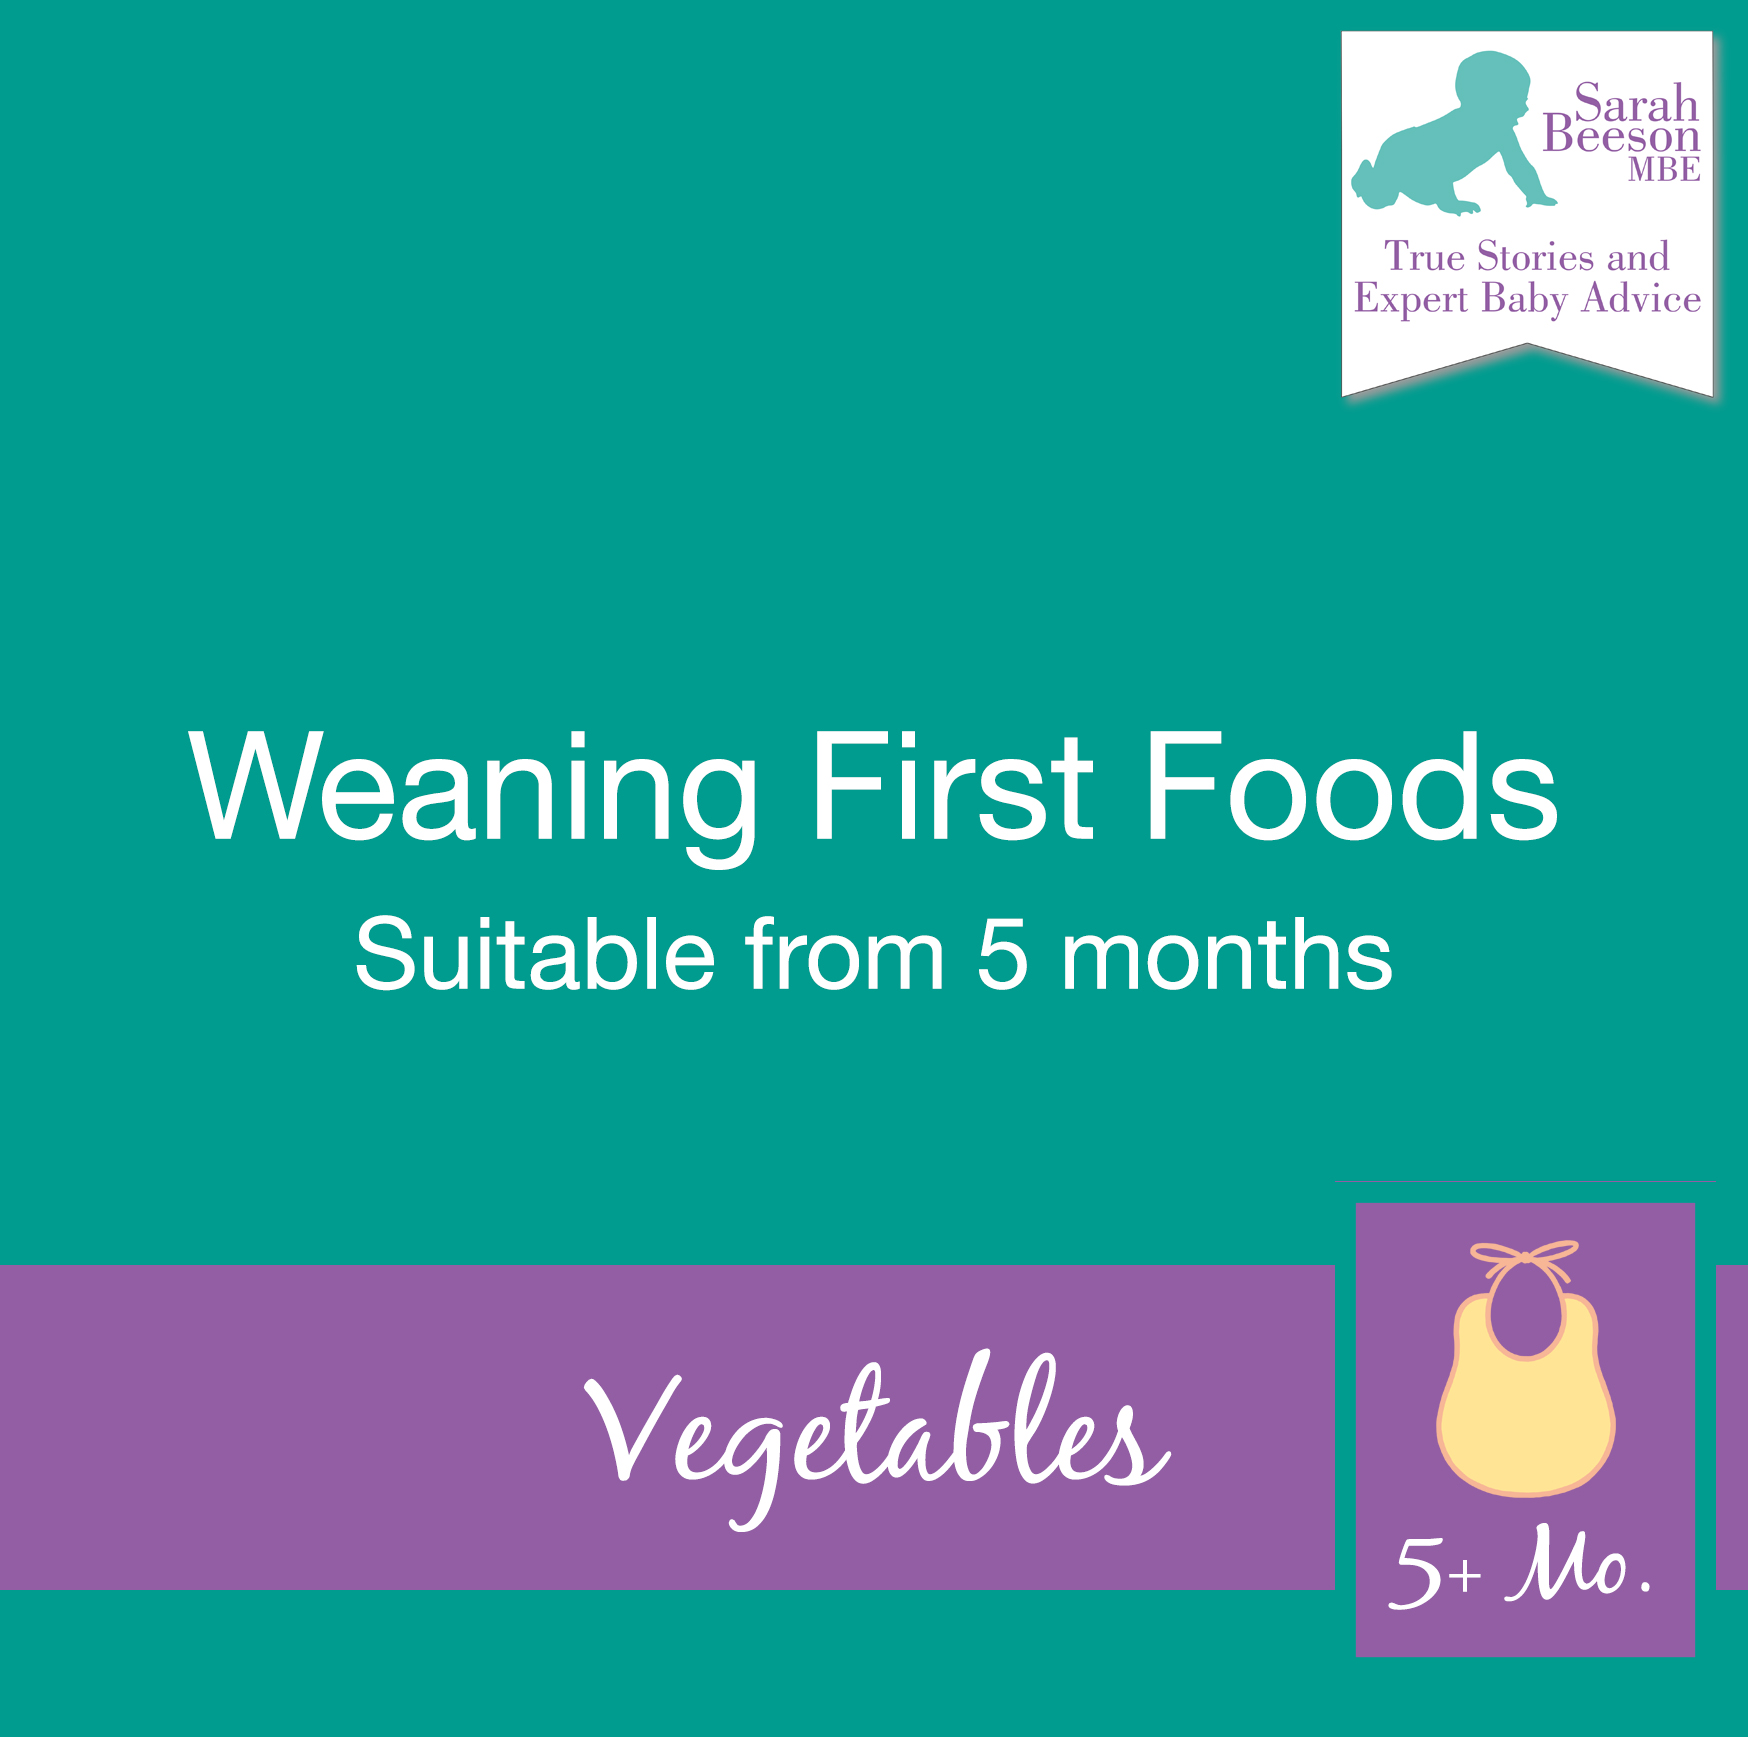 First Stage Weaning Suggestions – Vegetables